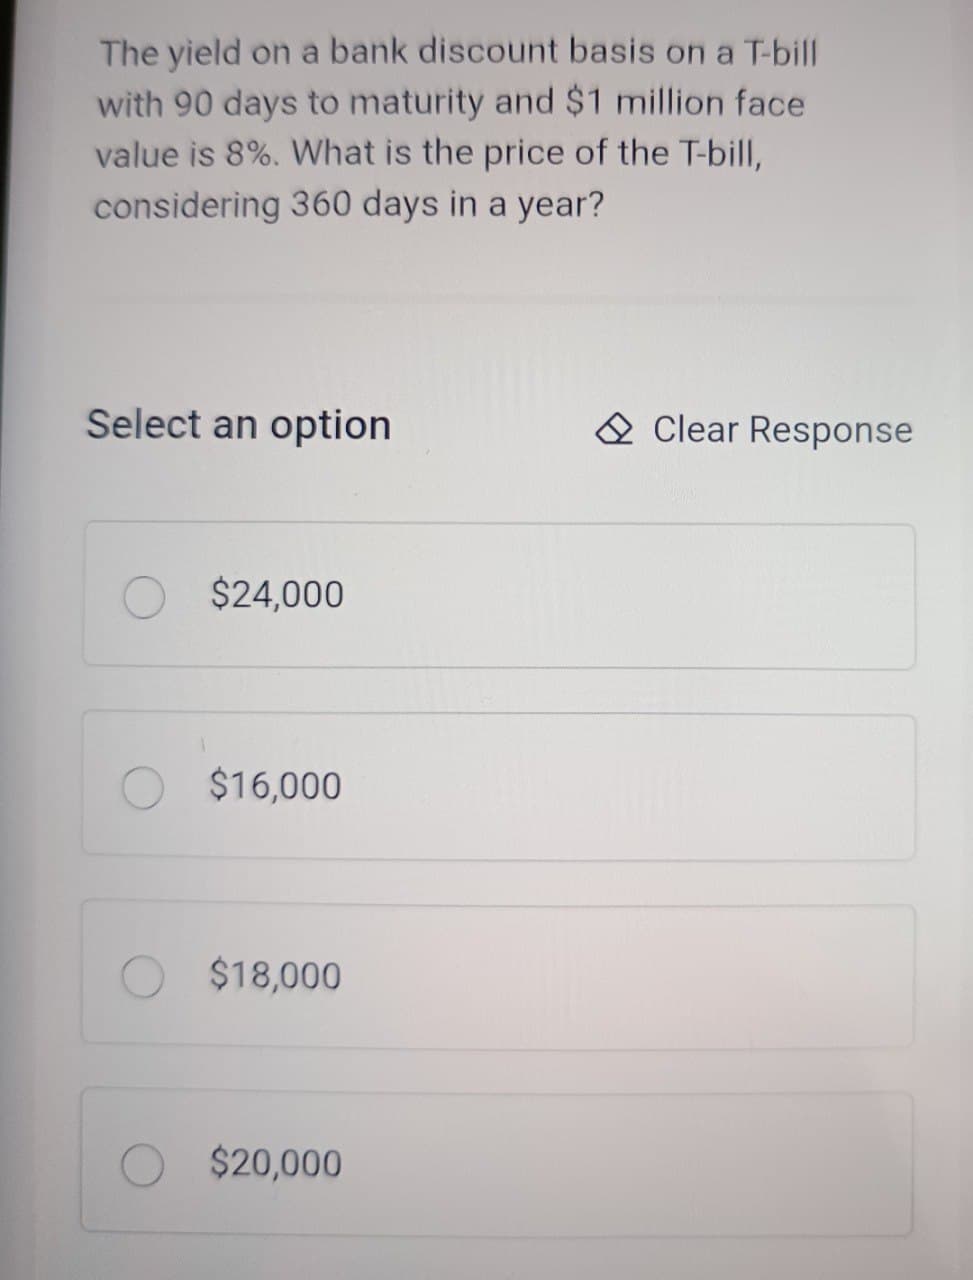 The yield on a bank discount basis on a T-bill
with 90 days to maturity and $1 million face
value is 8%. What is the price of the T-bill,
considering 360 days in a year?
Select an option
Clear Response
$24,000
$16,000
$18,000
O $20,000